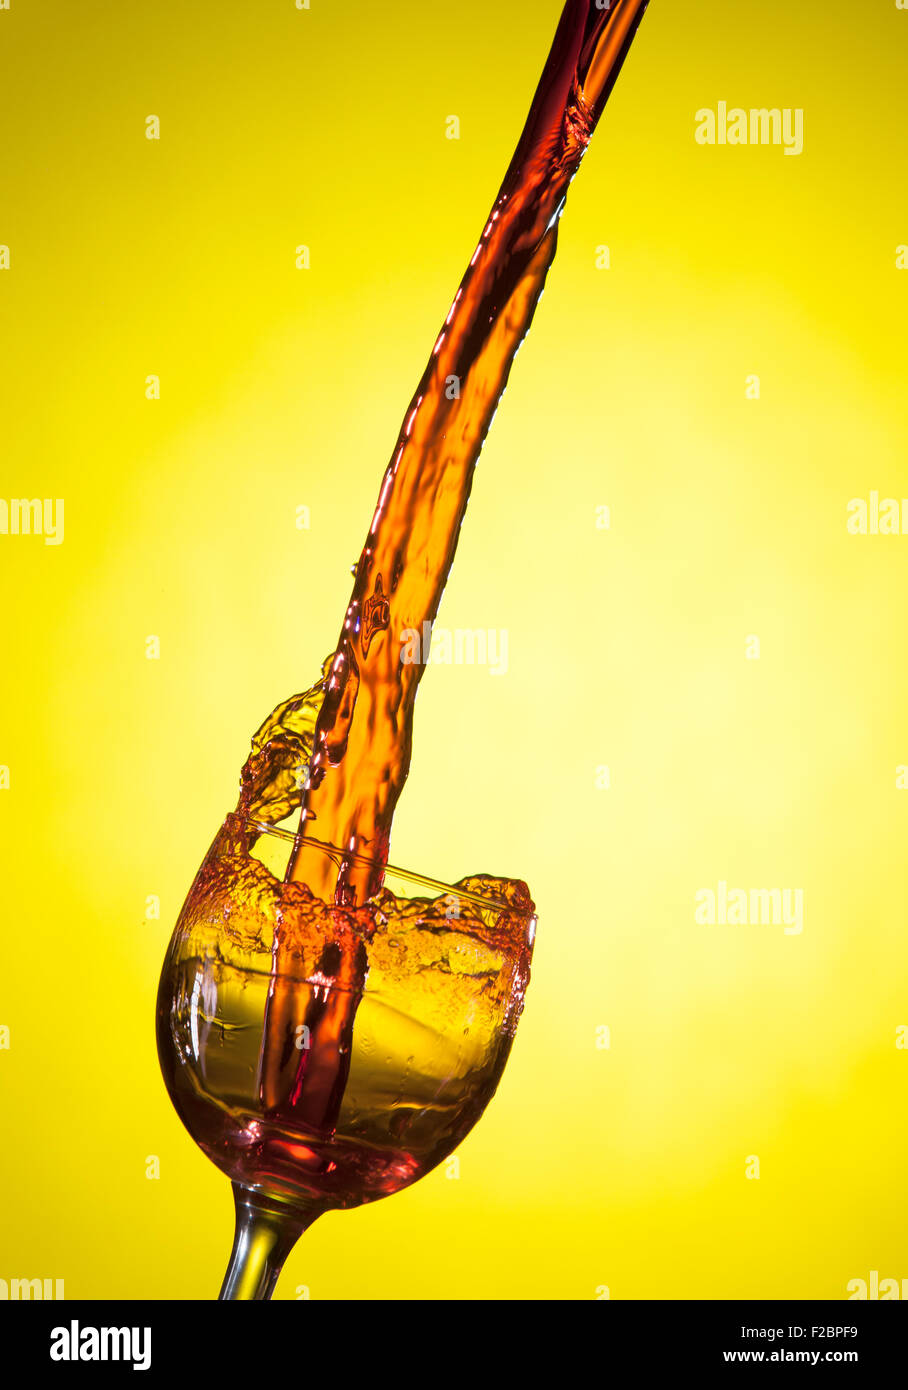 Wine pouring into a glass. Stock Photo